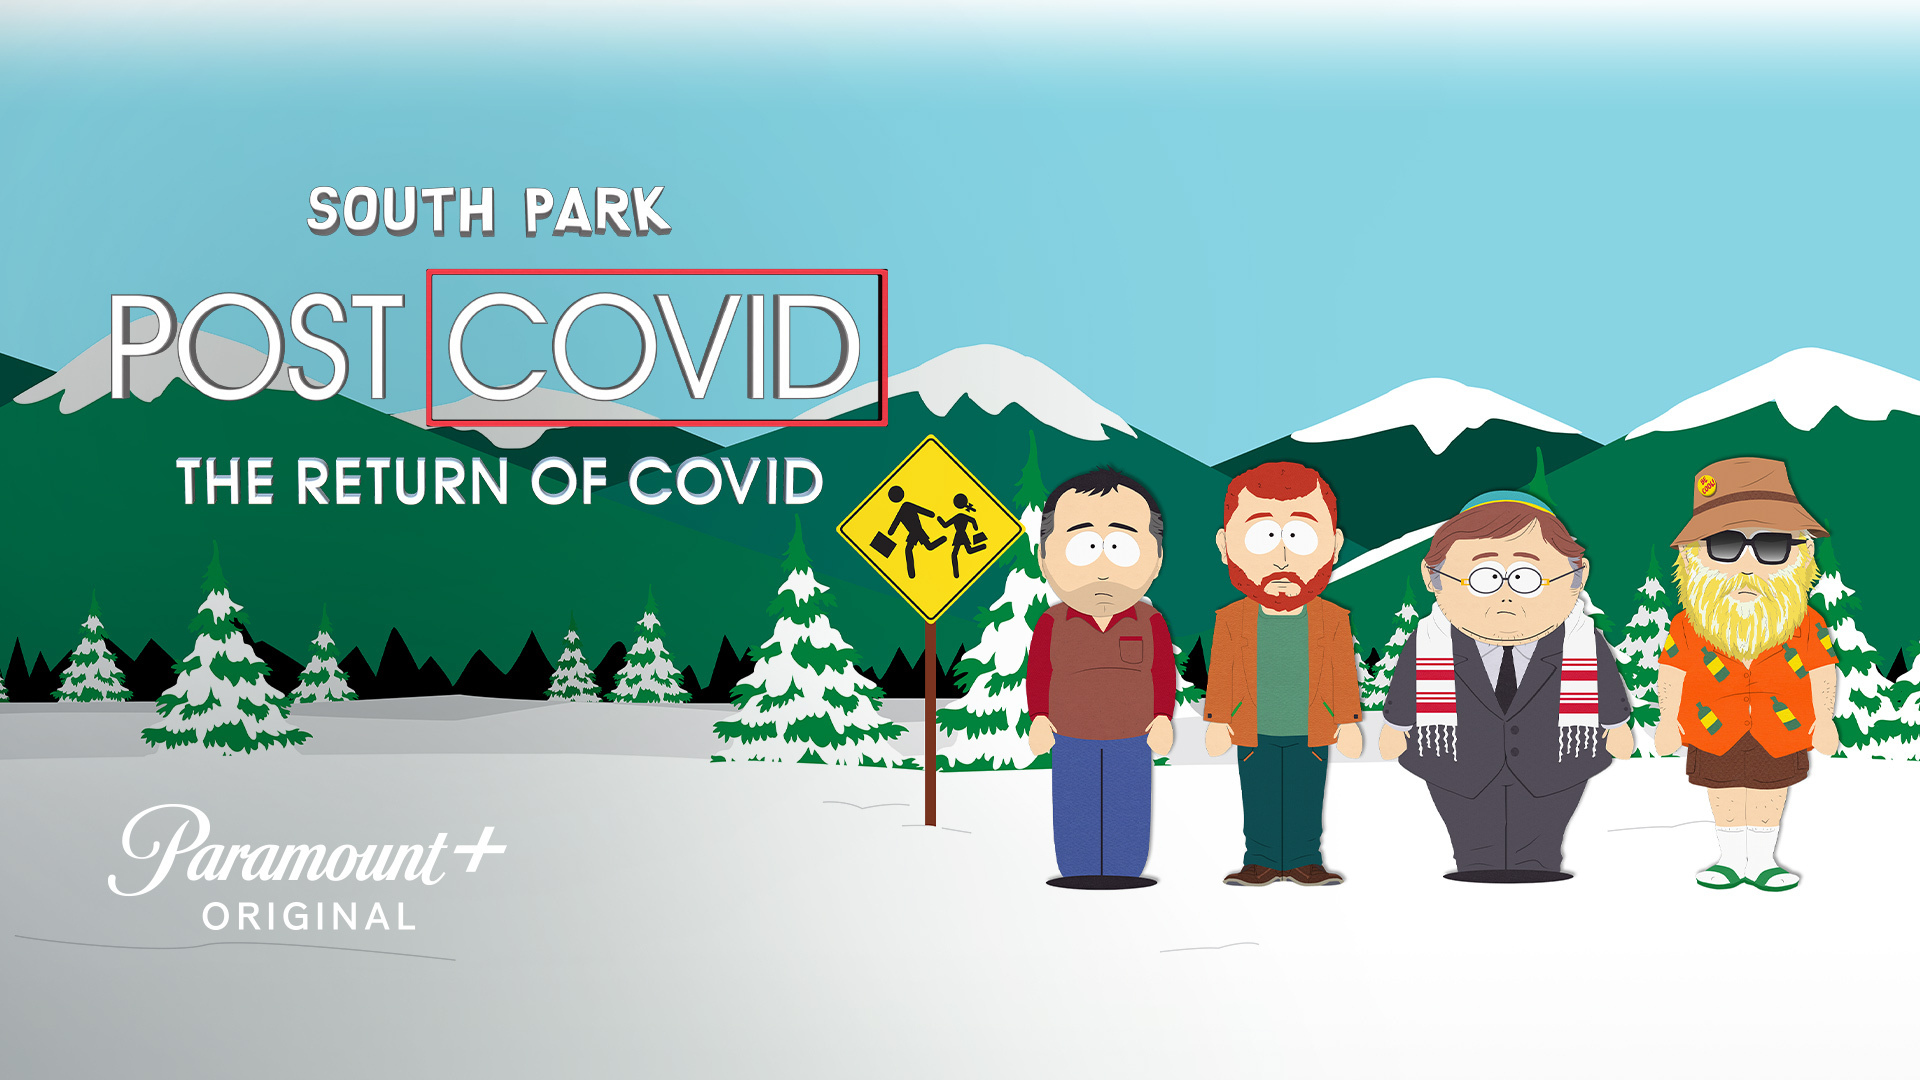 South Park: the Return of Covid